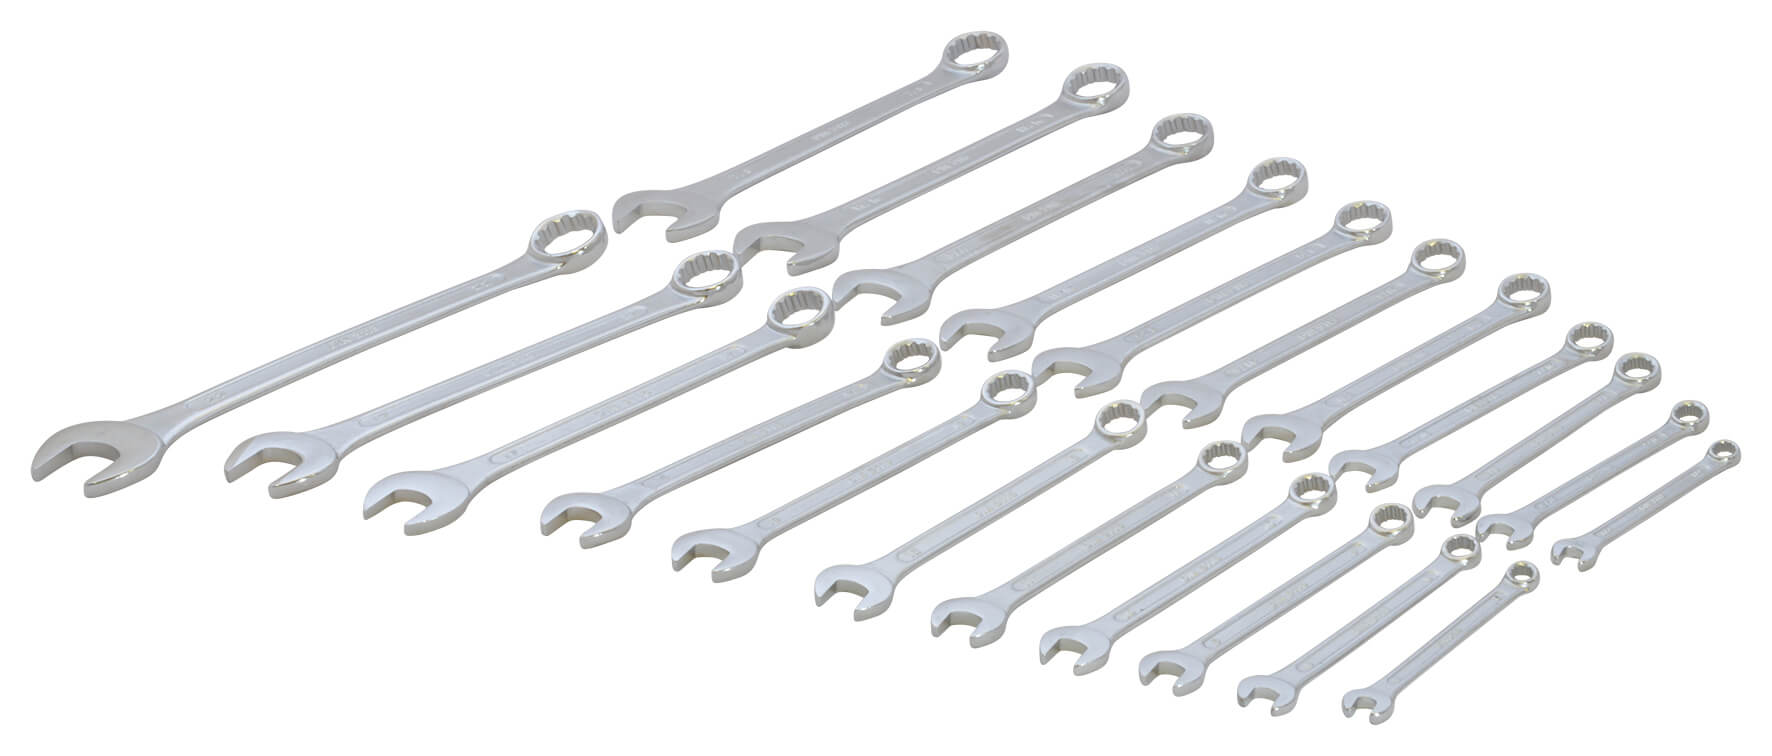 Combination Spanner Set - Metric/Imperial - 22 Piece